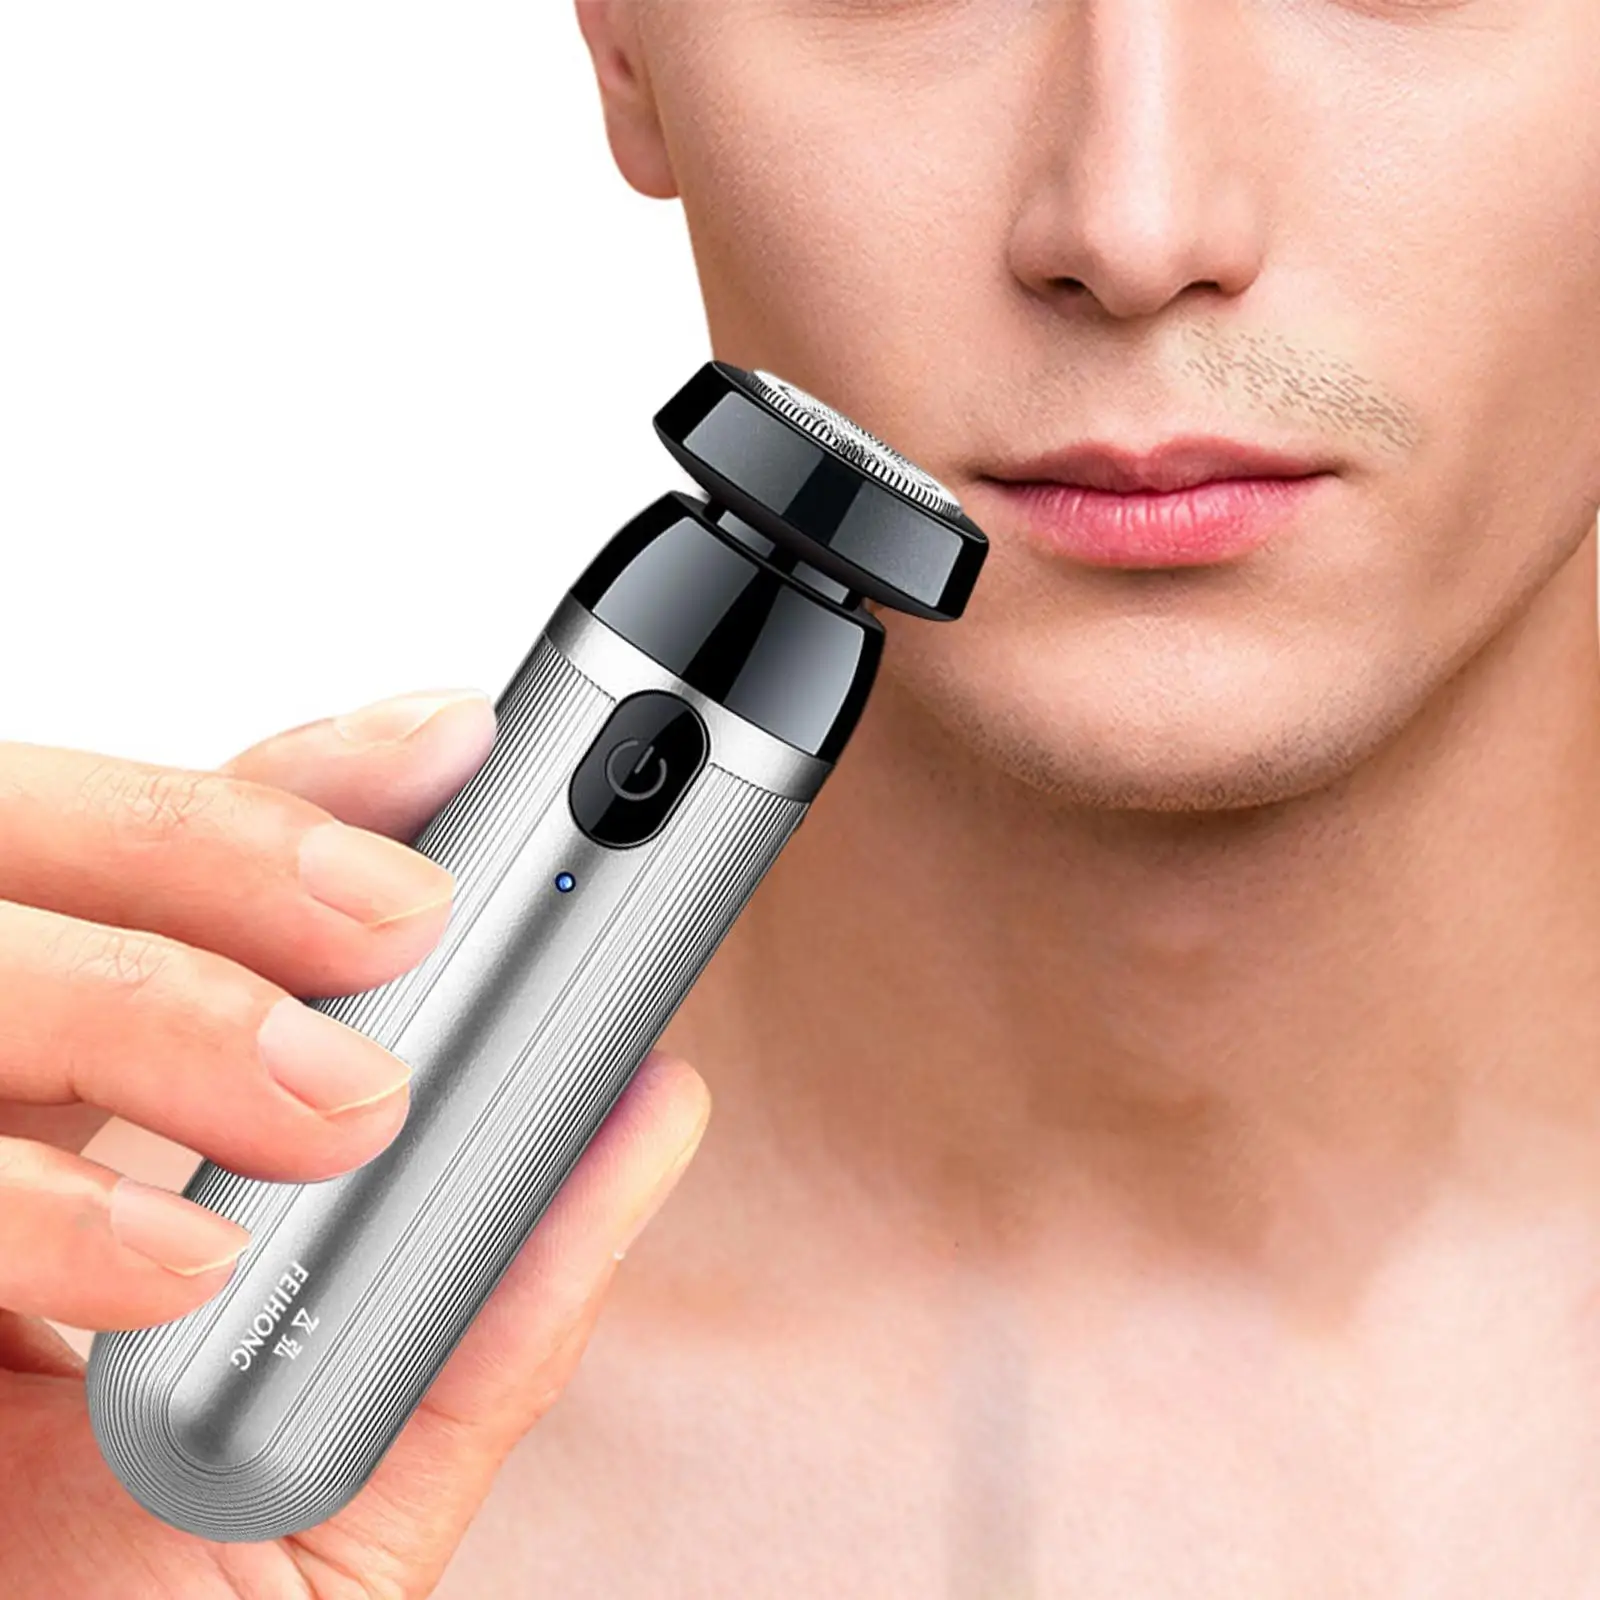 Mini Electric Shaver Razor for Travel Lightweight USB Rechargeable 360 Rotary Blade Head